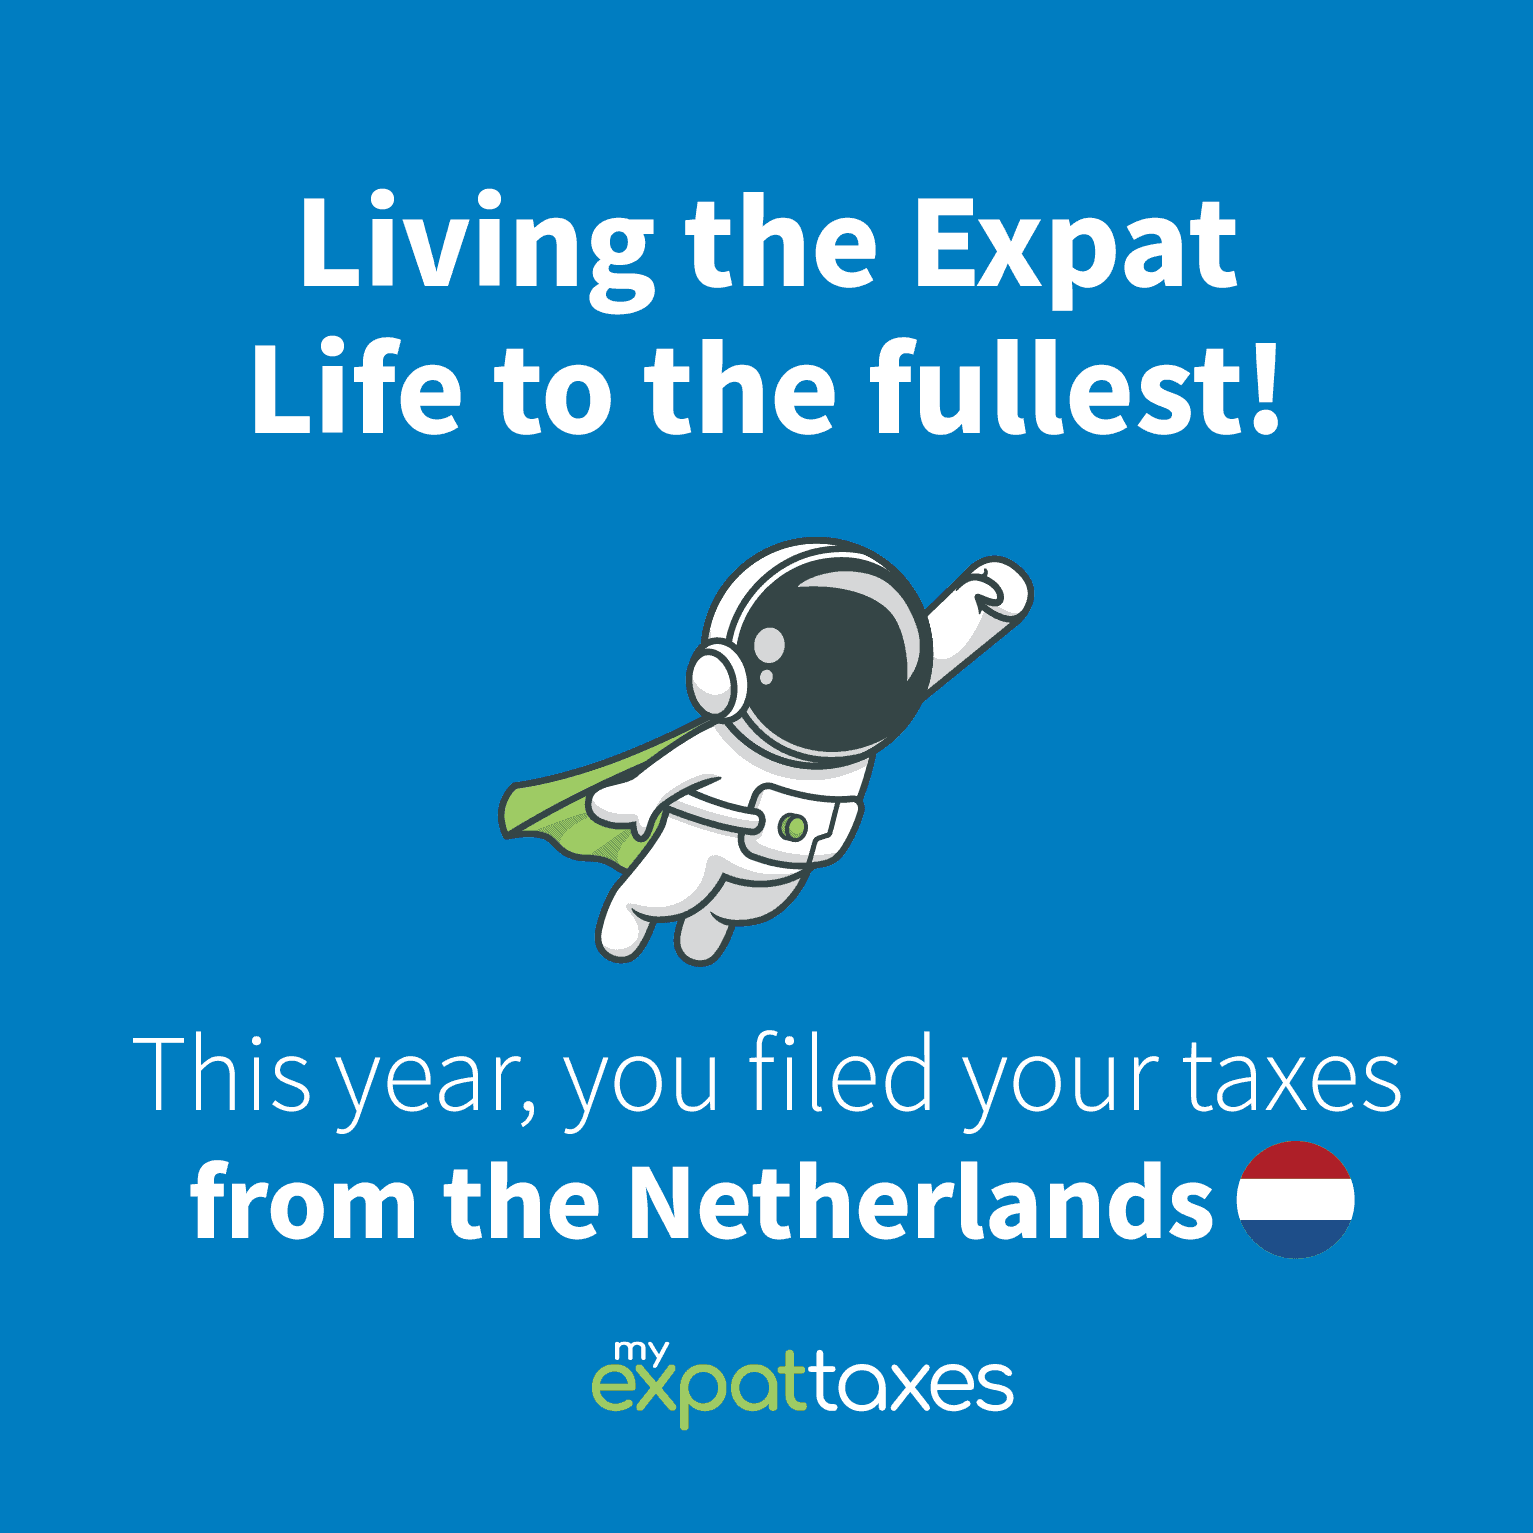 Living the Expat life to the fullest! This year, you filed your taxes from the Netherlands.